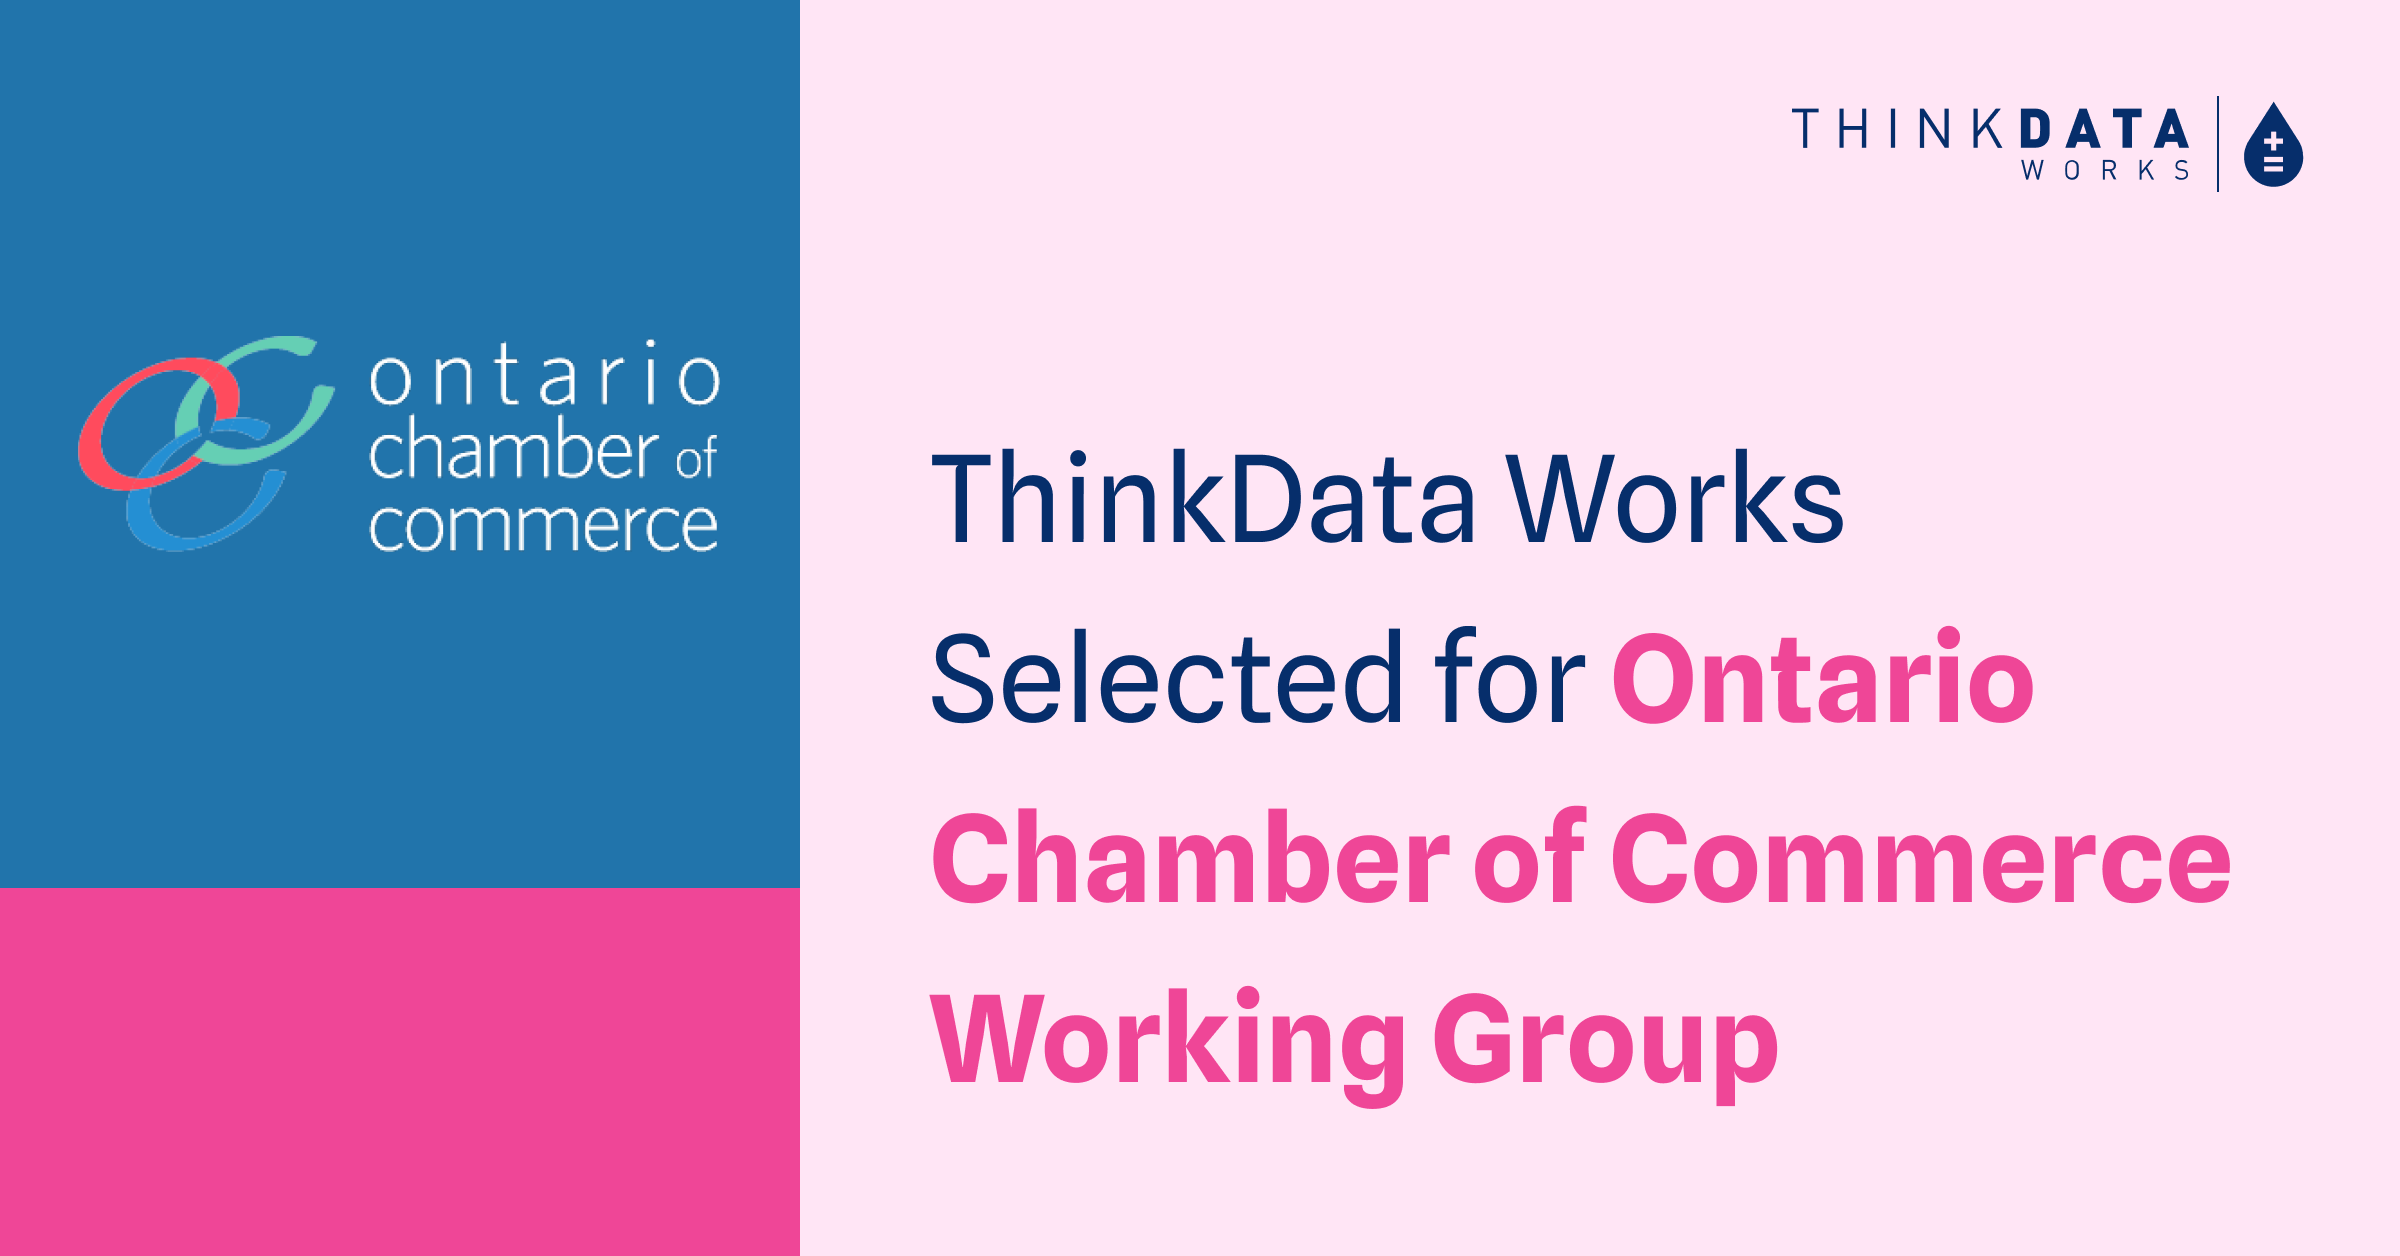 ThinkData Works selected for Ontario Chamber's Commerce Working Group